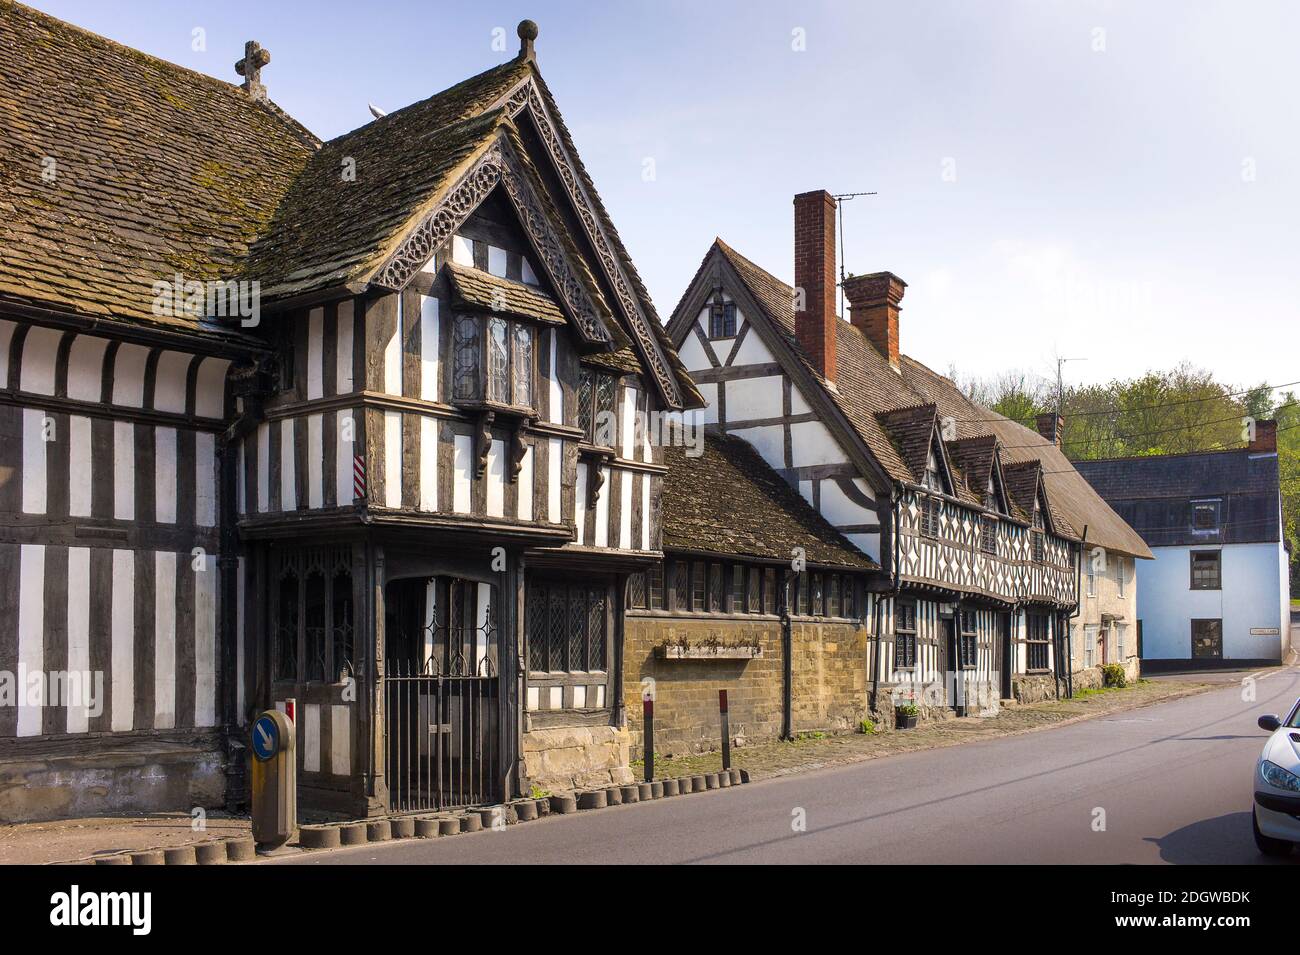 The Fifteenth century Porch House in the High Stree Potterne village near Devizes Wiltshire England UK Stock Photo